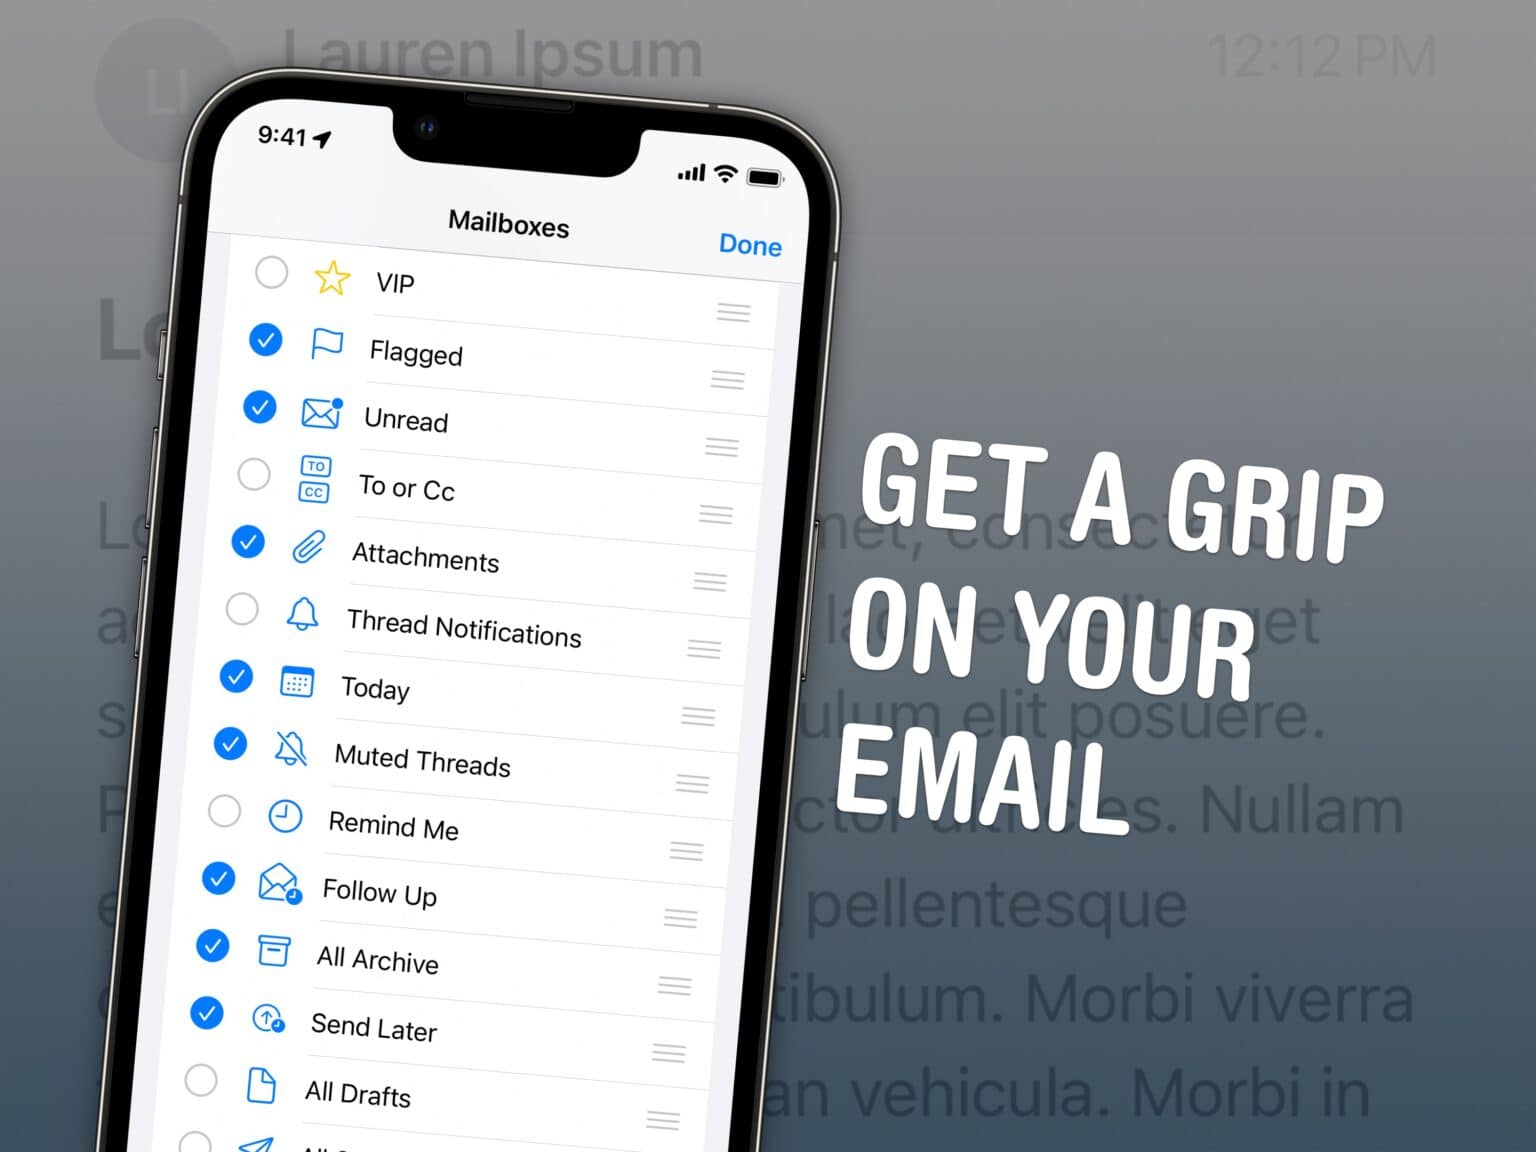 Get a grip on your email